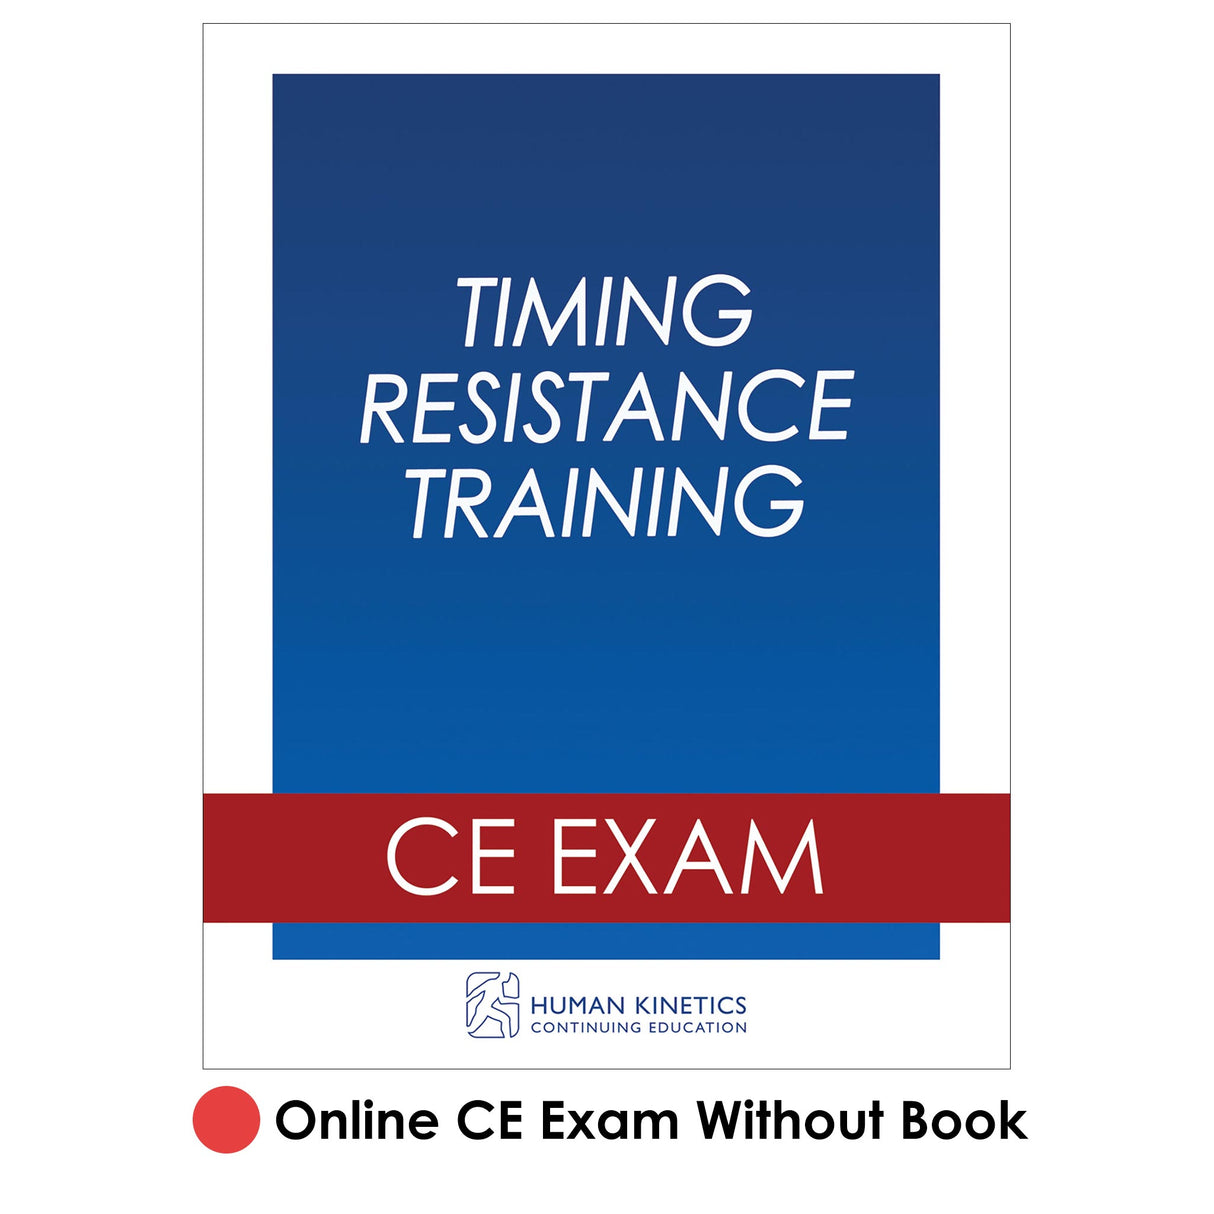 Timing Resistance Training Online CE Exam Without Book